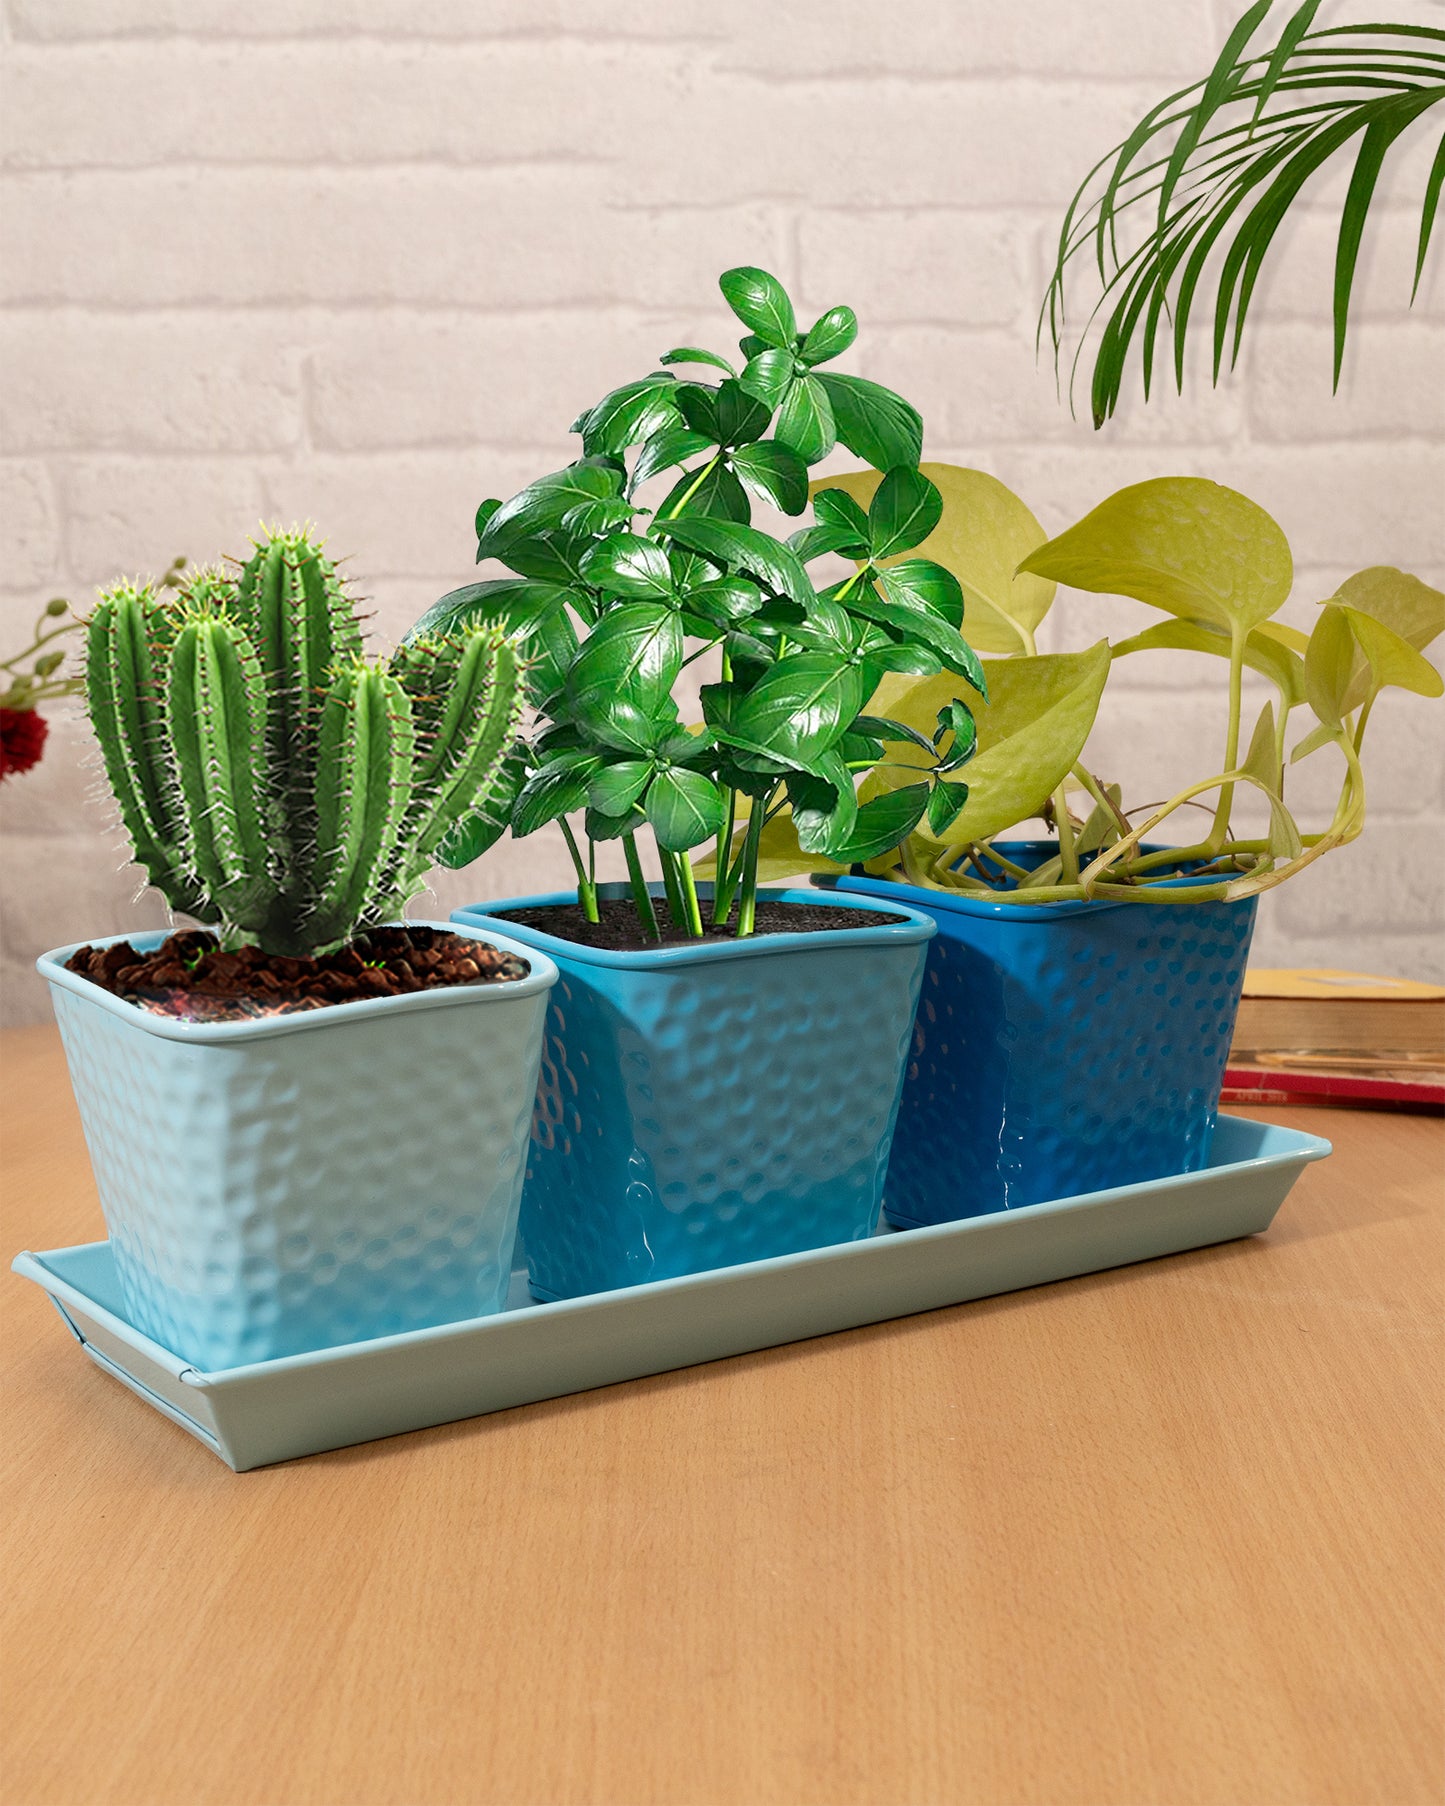 Herb Pot Planter Set with Tray for Indoor Garden or Outdoor Use,Metal Succulent Potted Planters for Kitchen, (Set of 3, 4.25” x 4” Planters on 12.5” x 4" Tray)